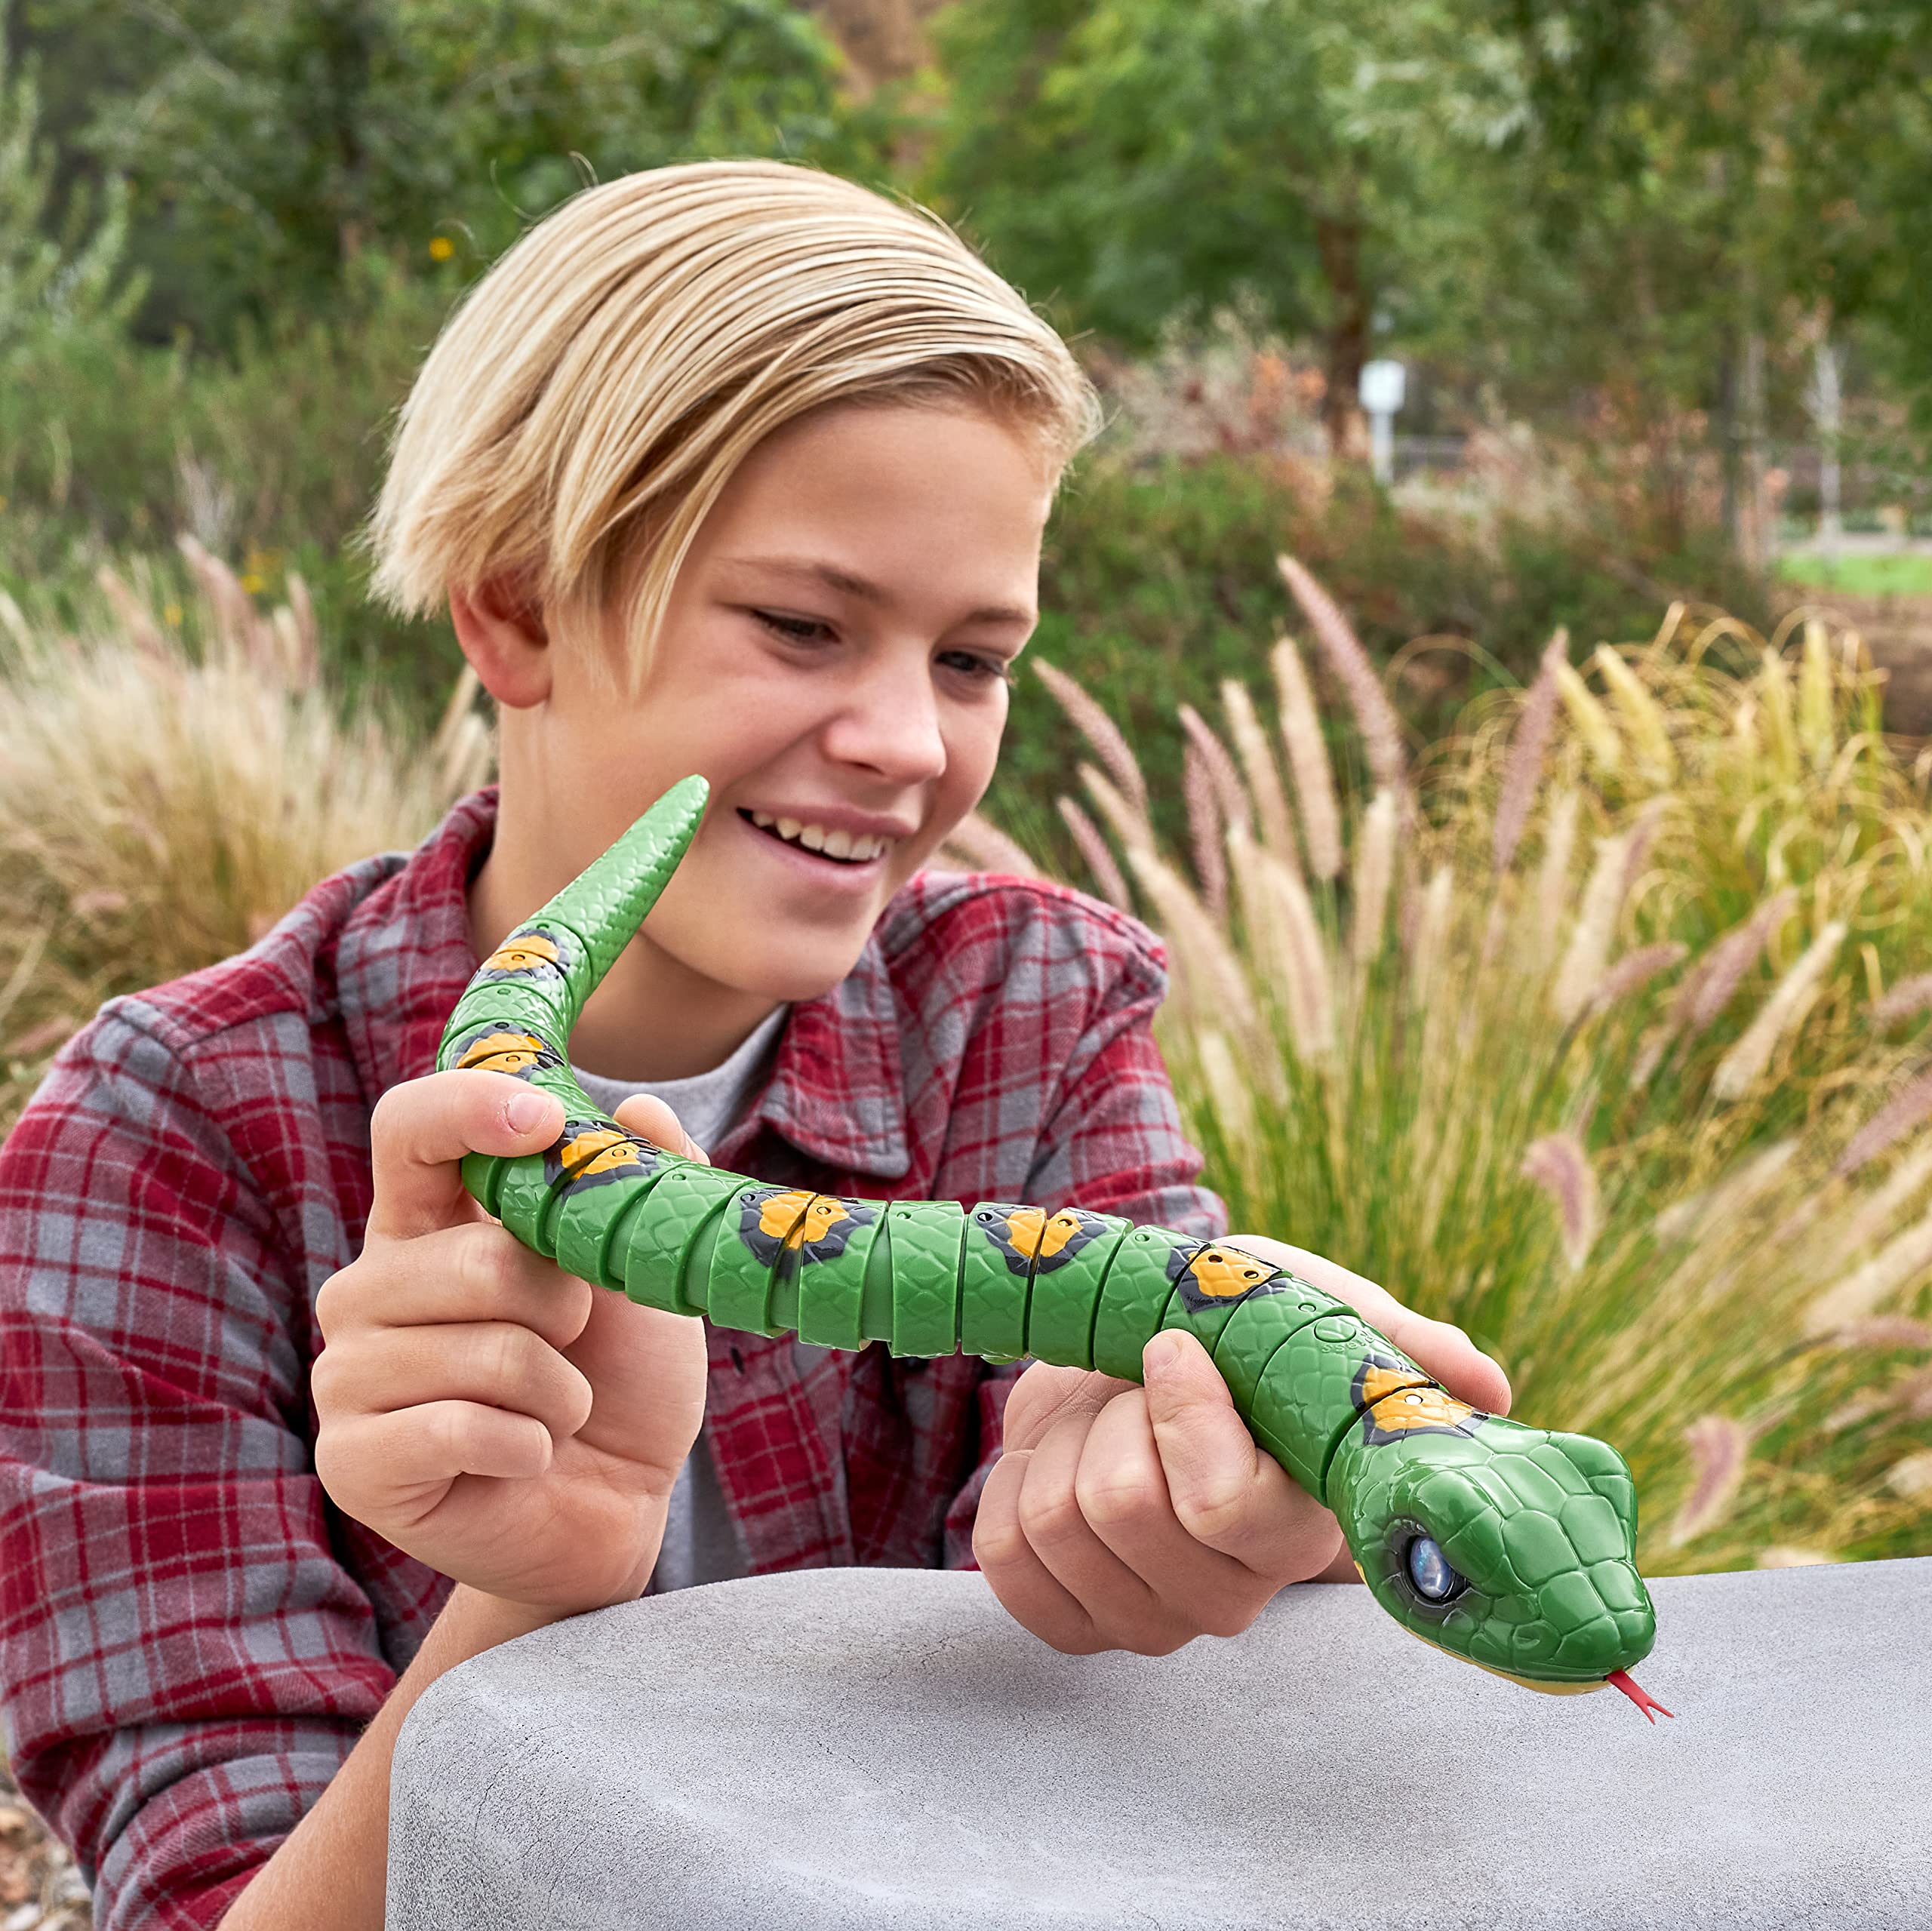 Robo Alive Snake + Lizard Series 3 by ZURU Battery-Powered Robotic Light Up Interactive Electronic Reptile Toy That Moves